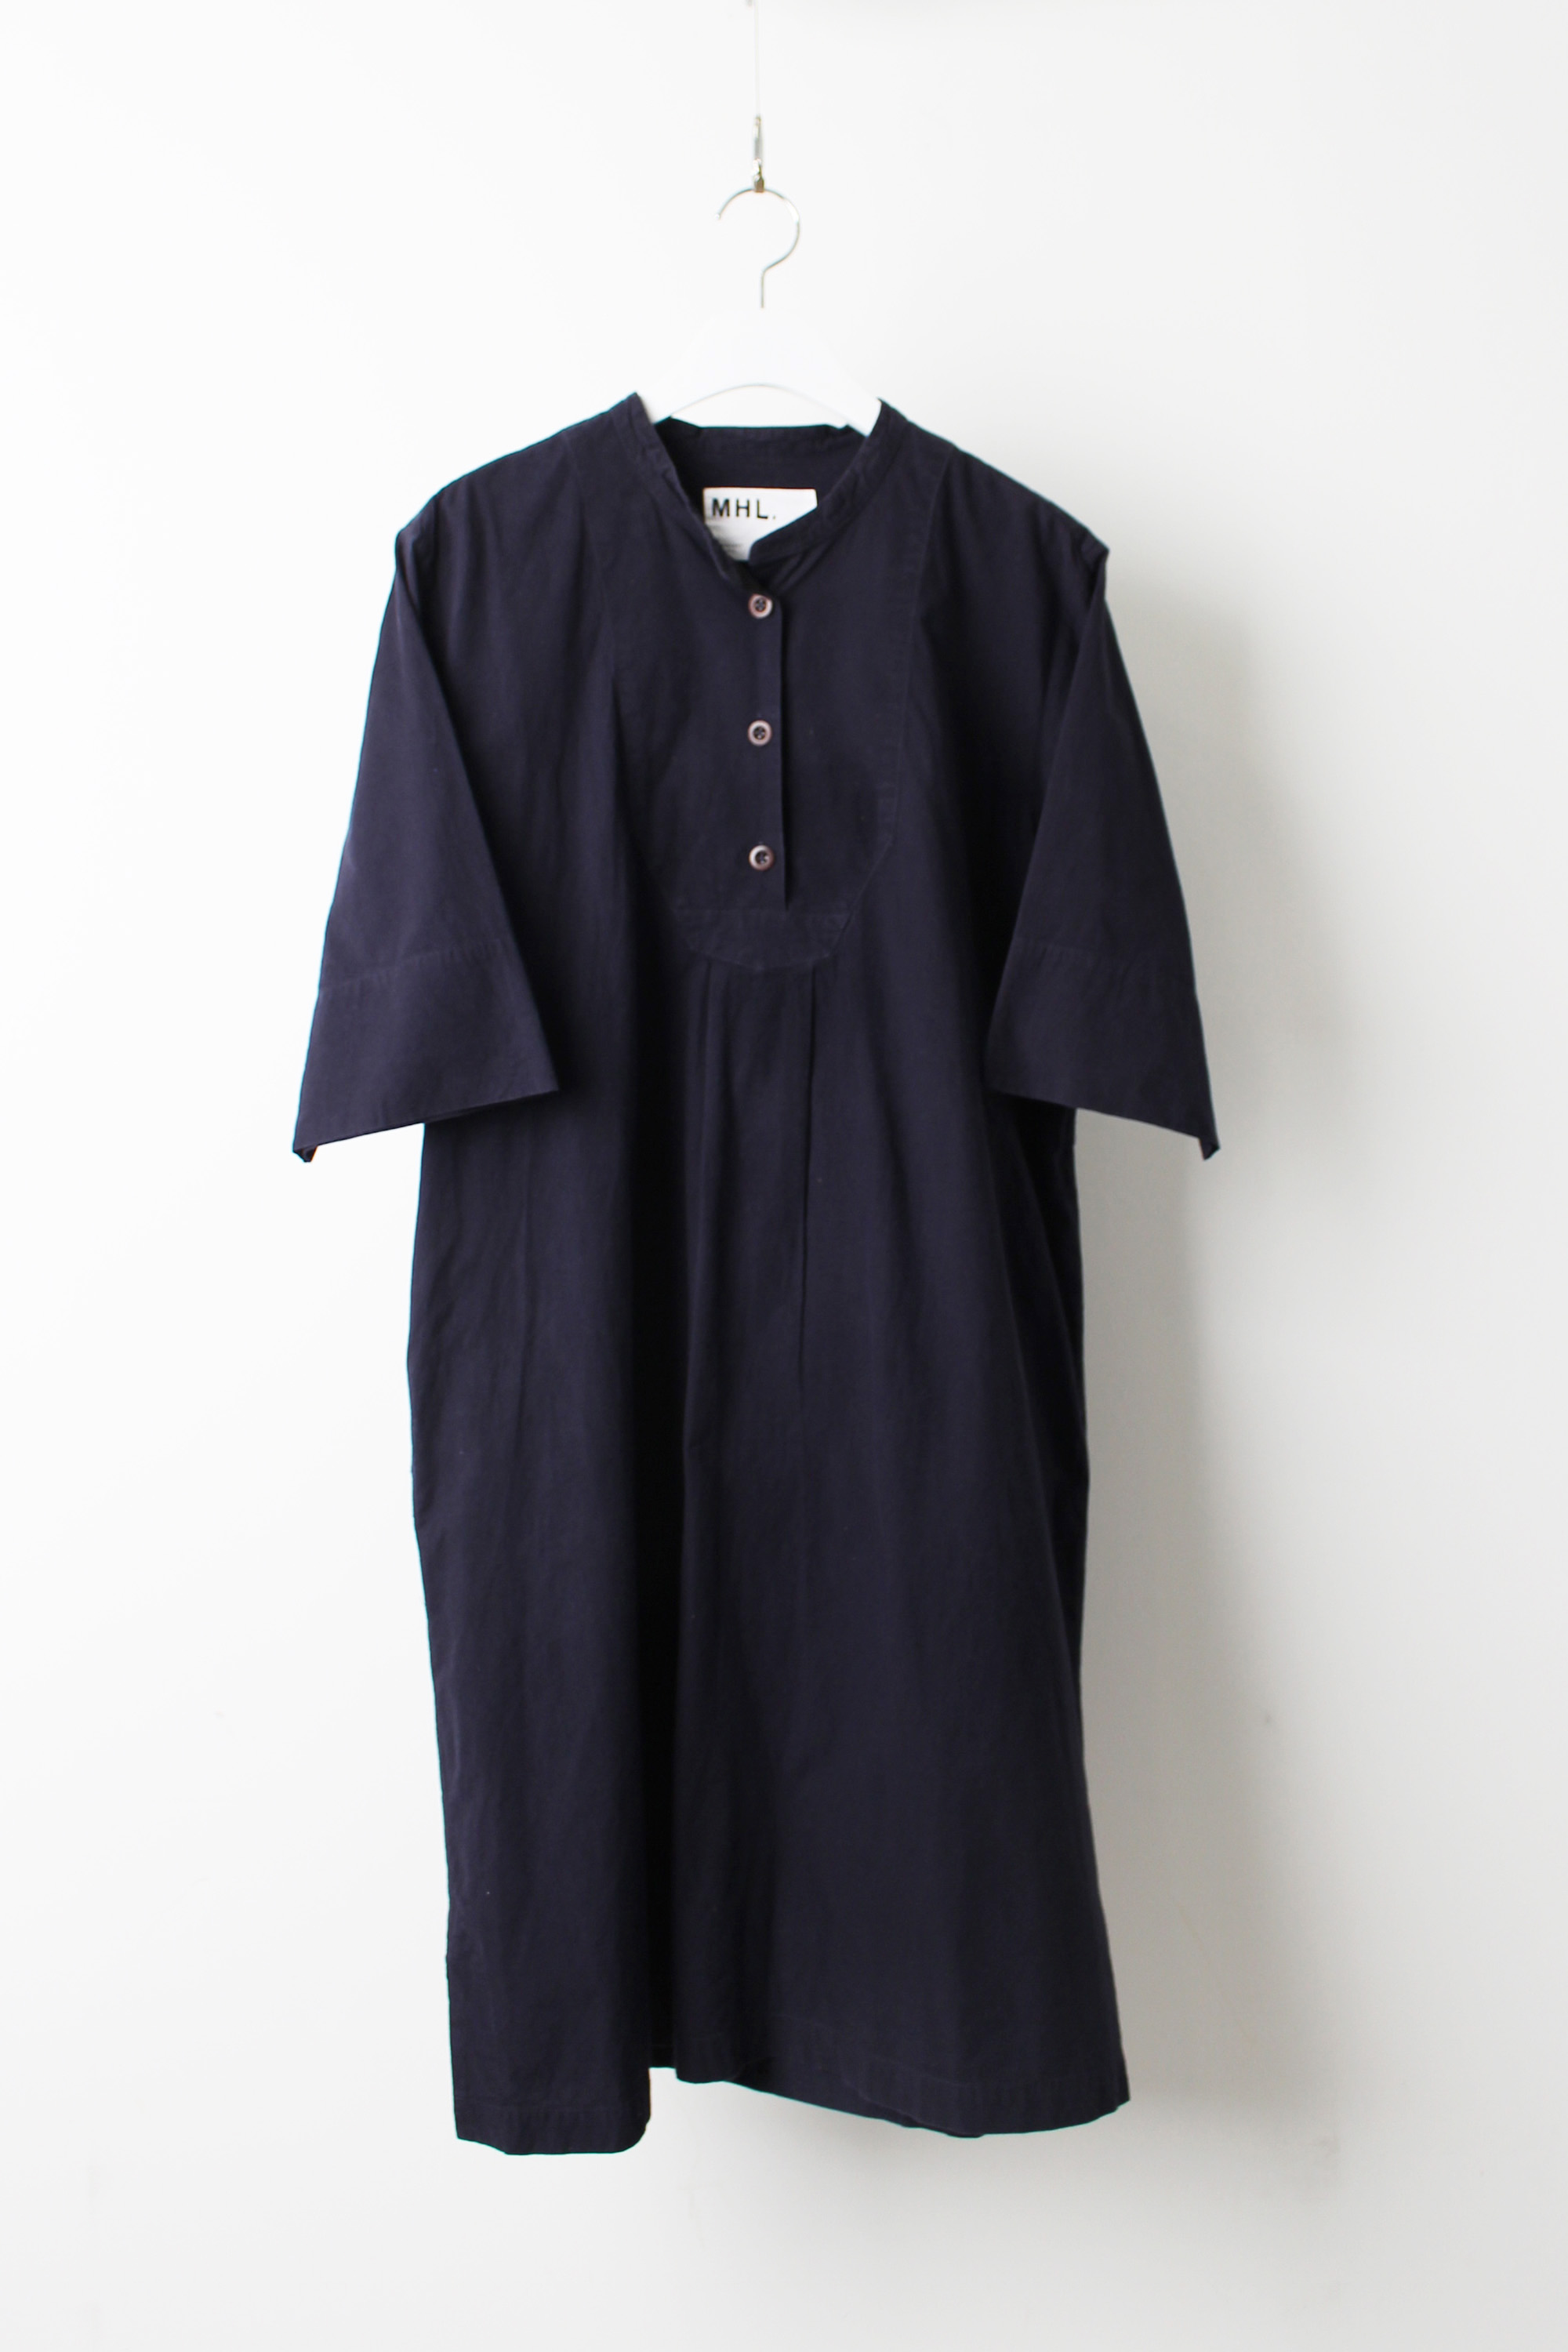 MHL Pullover one-piece